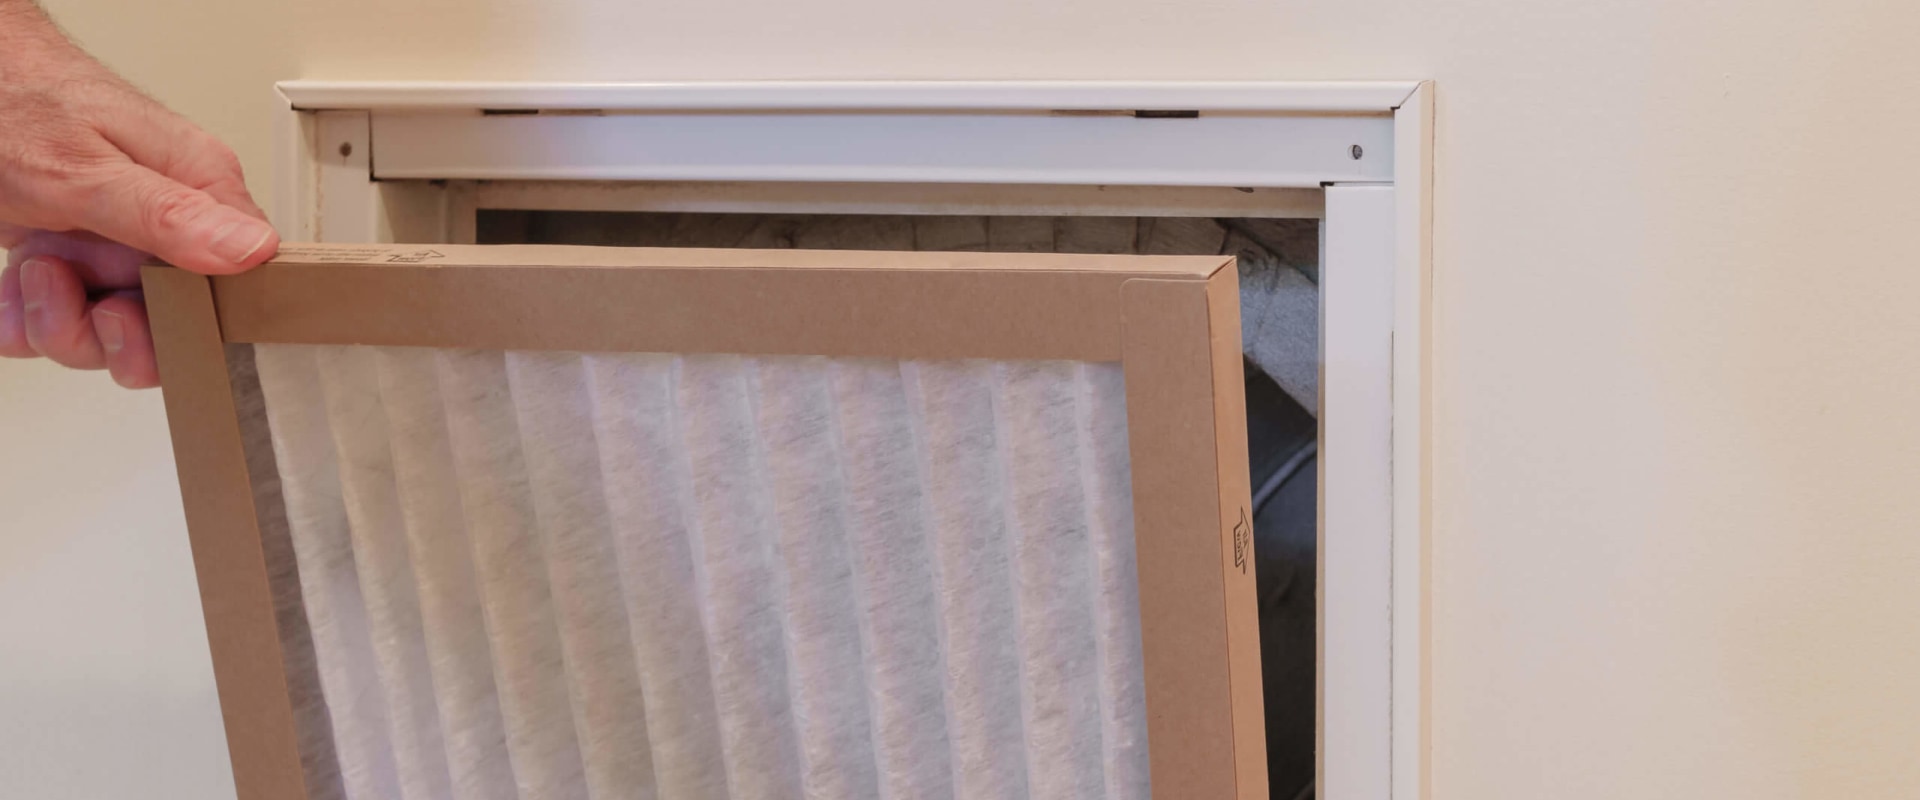 Everything You Need to Know About Air Filters in Your Home